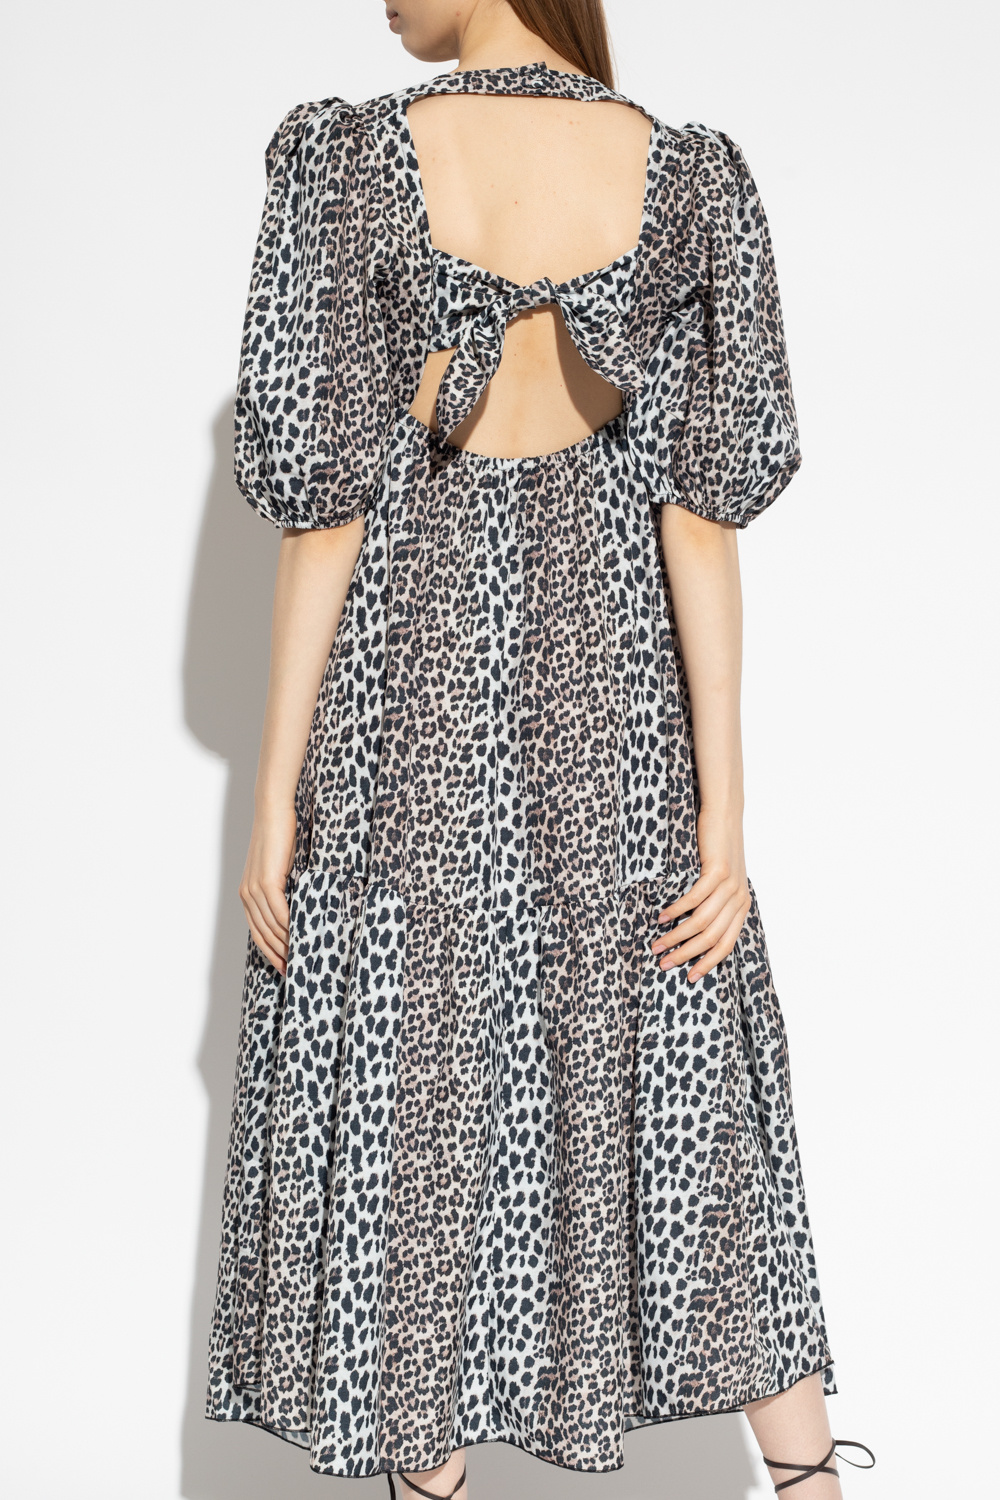 Plus Straight Leg Barbed Wire Print Jean ‘Carrie’ dress